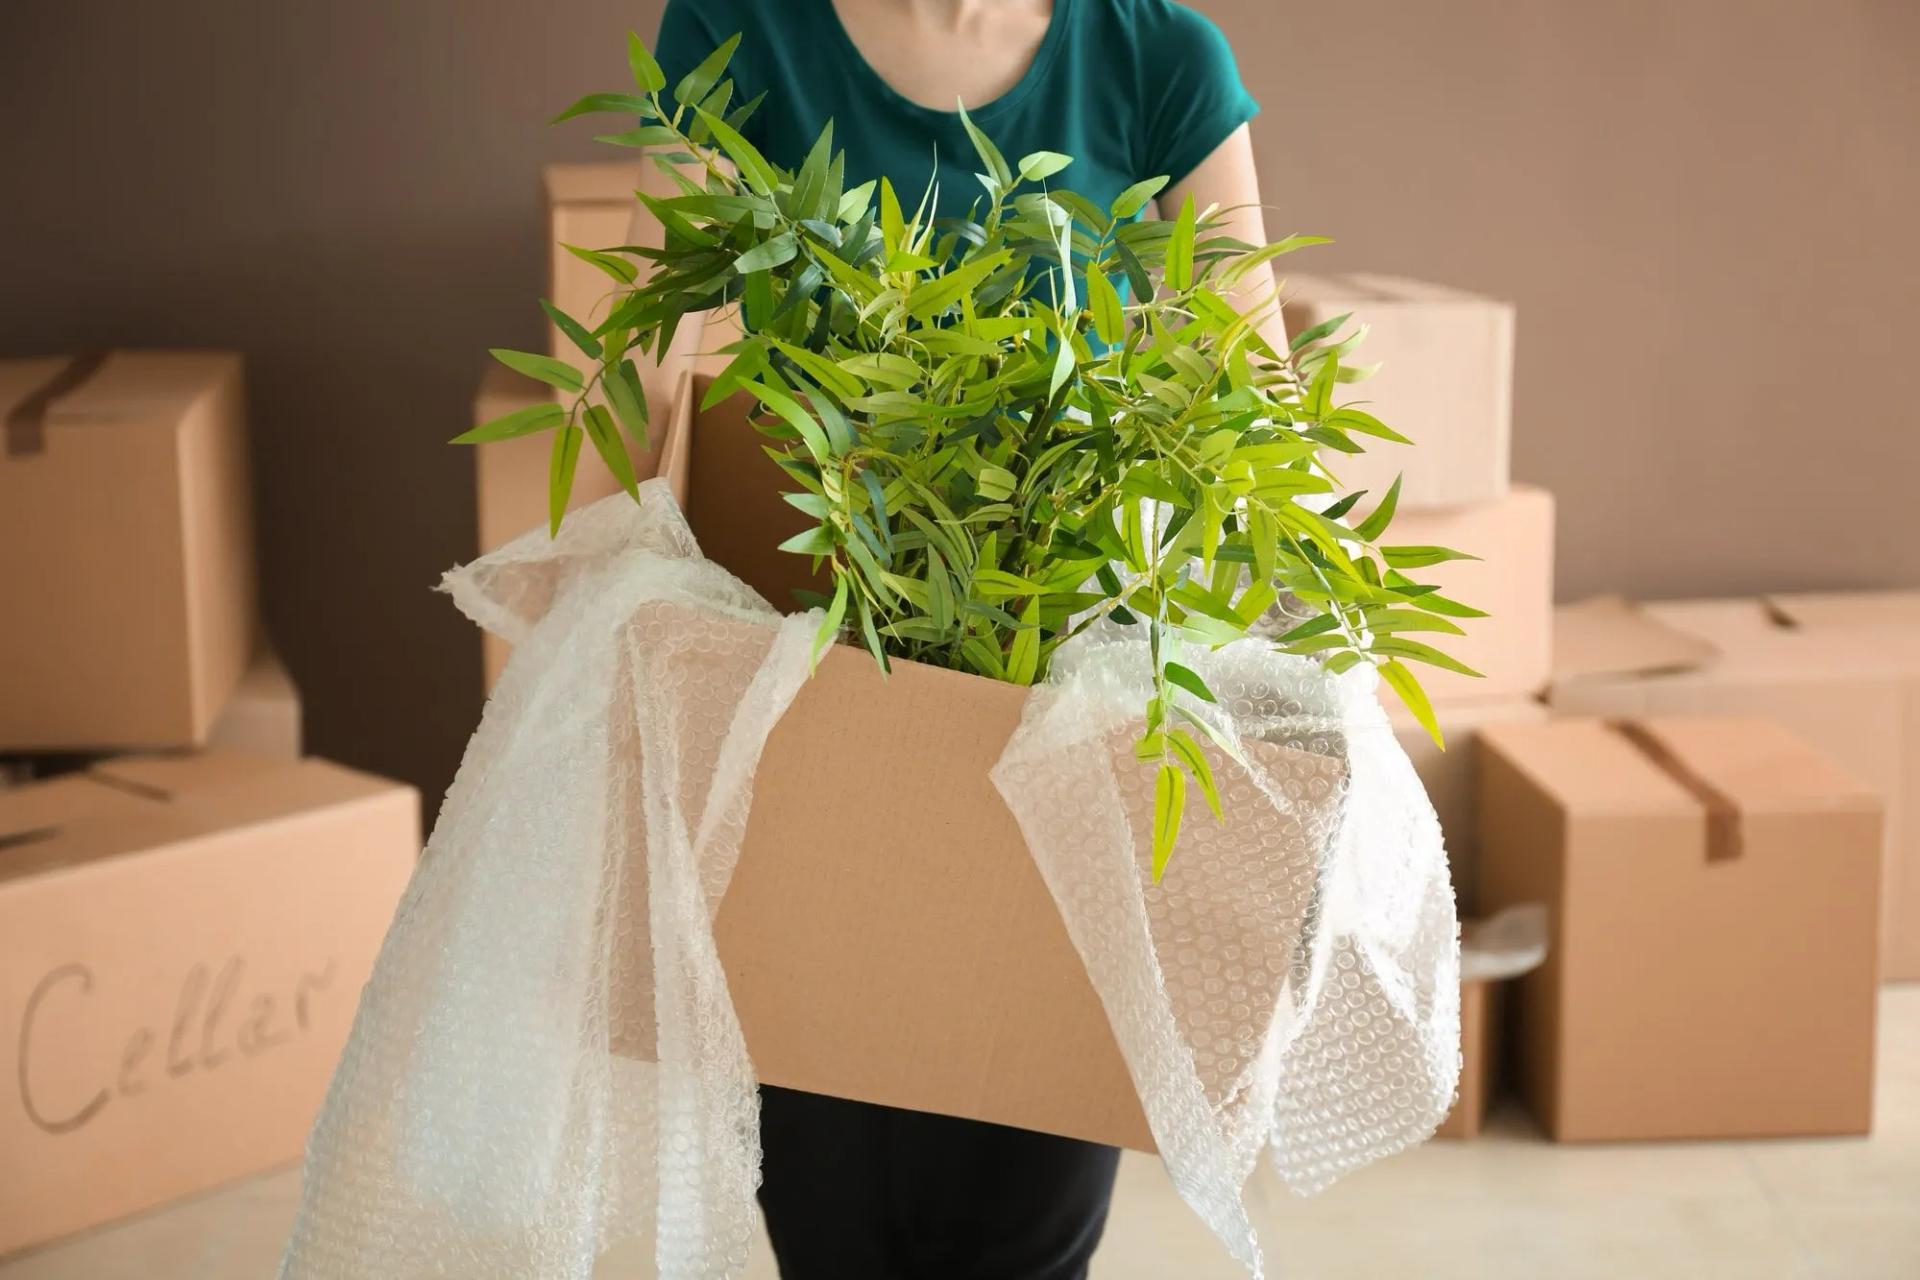 Packing Plants